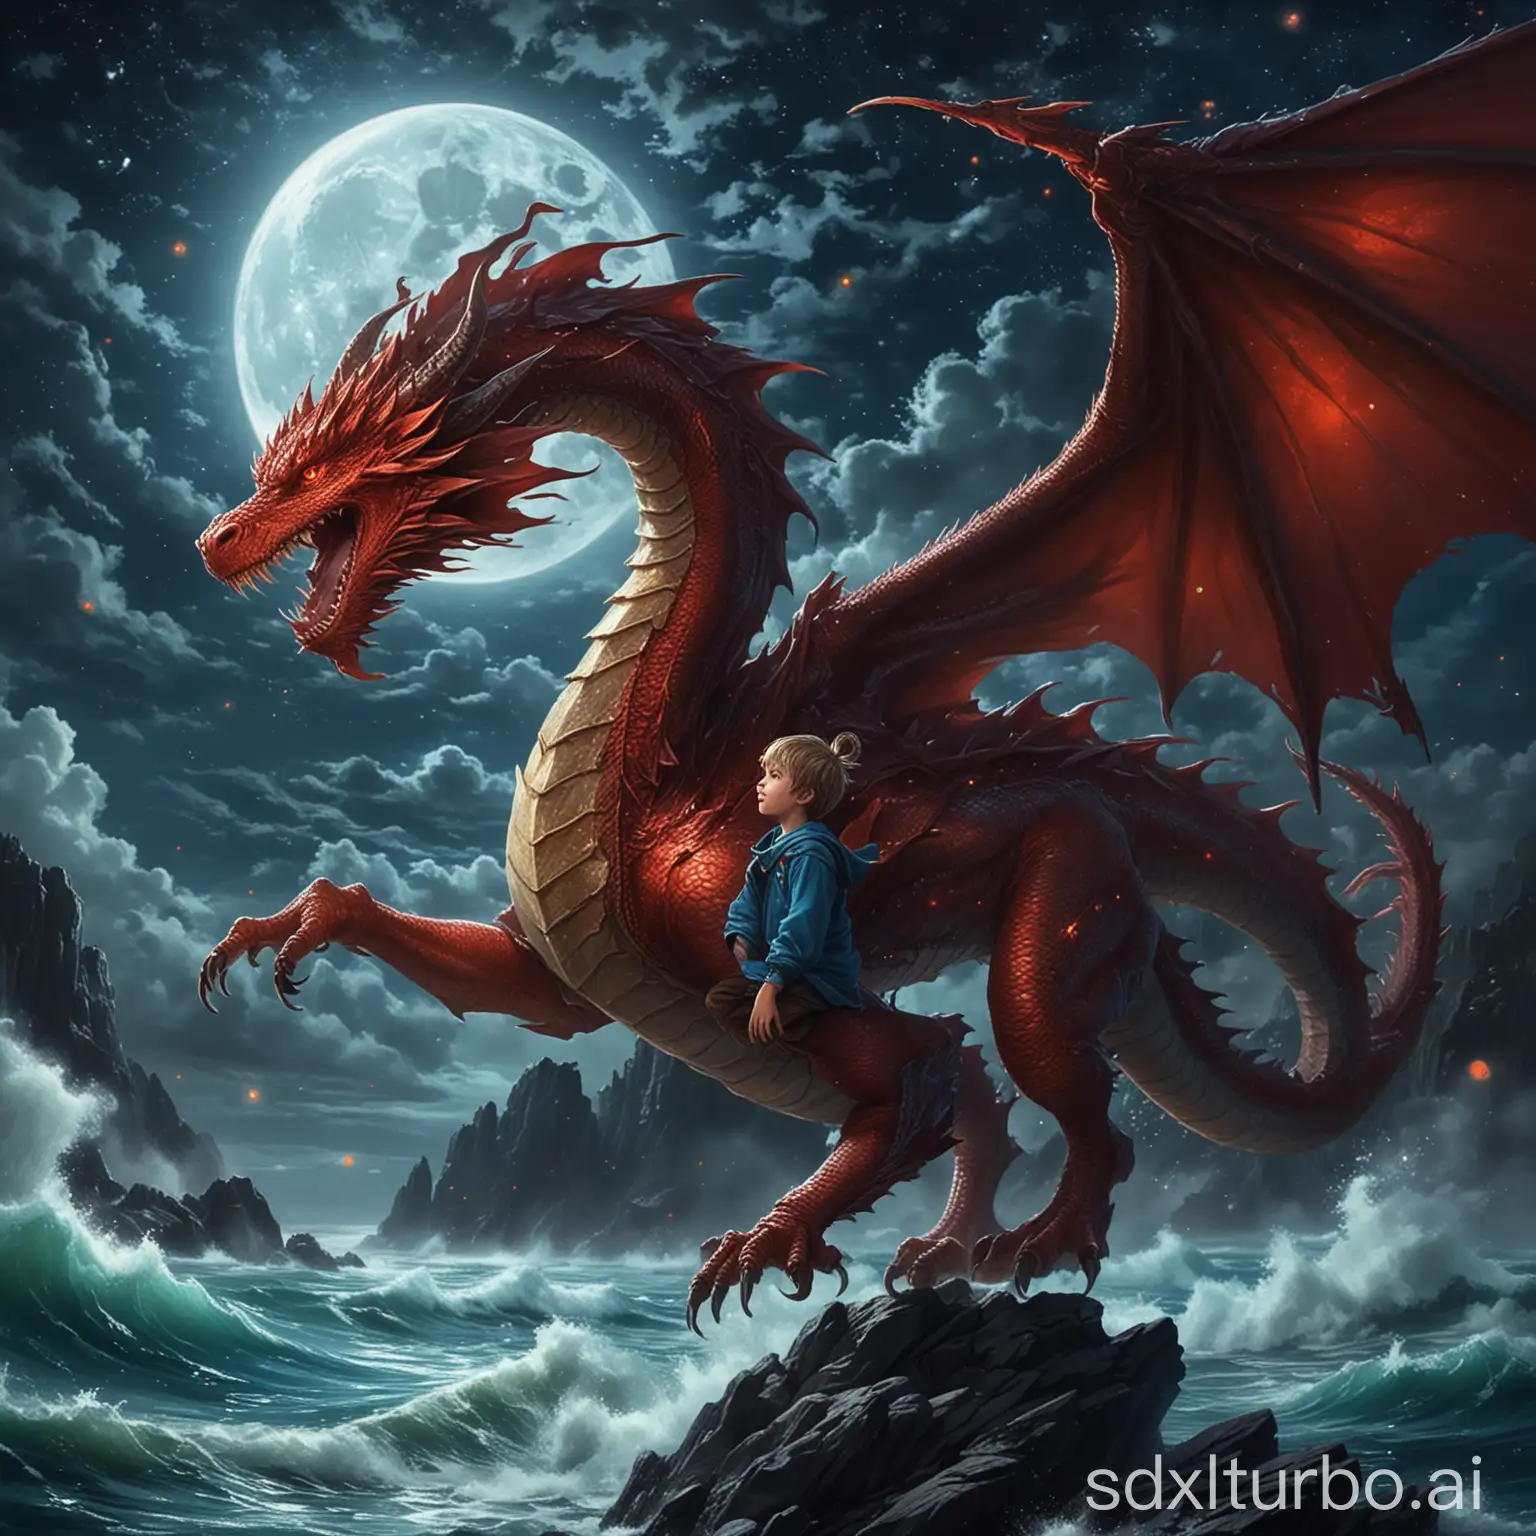 Young-Boy-Flying-on-Majestic-Dragon-Over-Moonlit-Sea